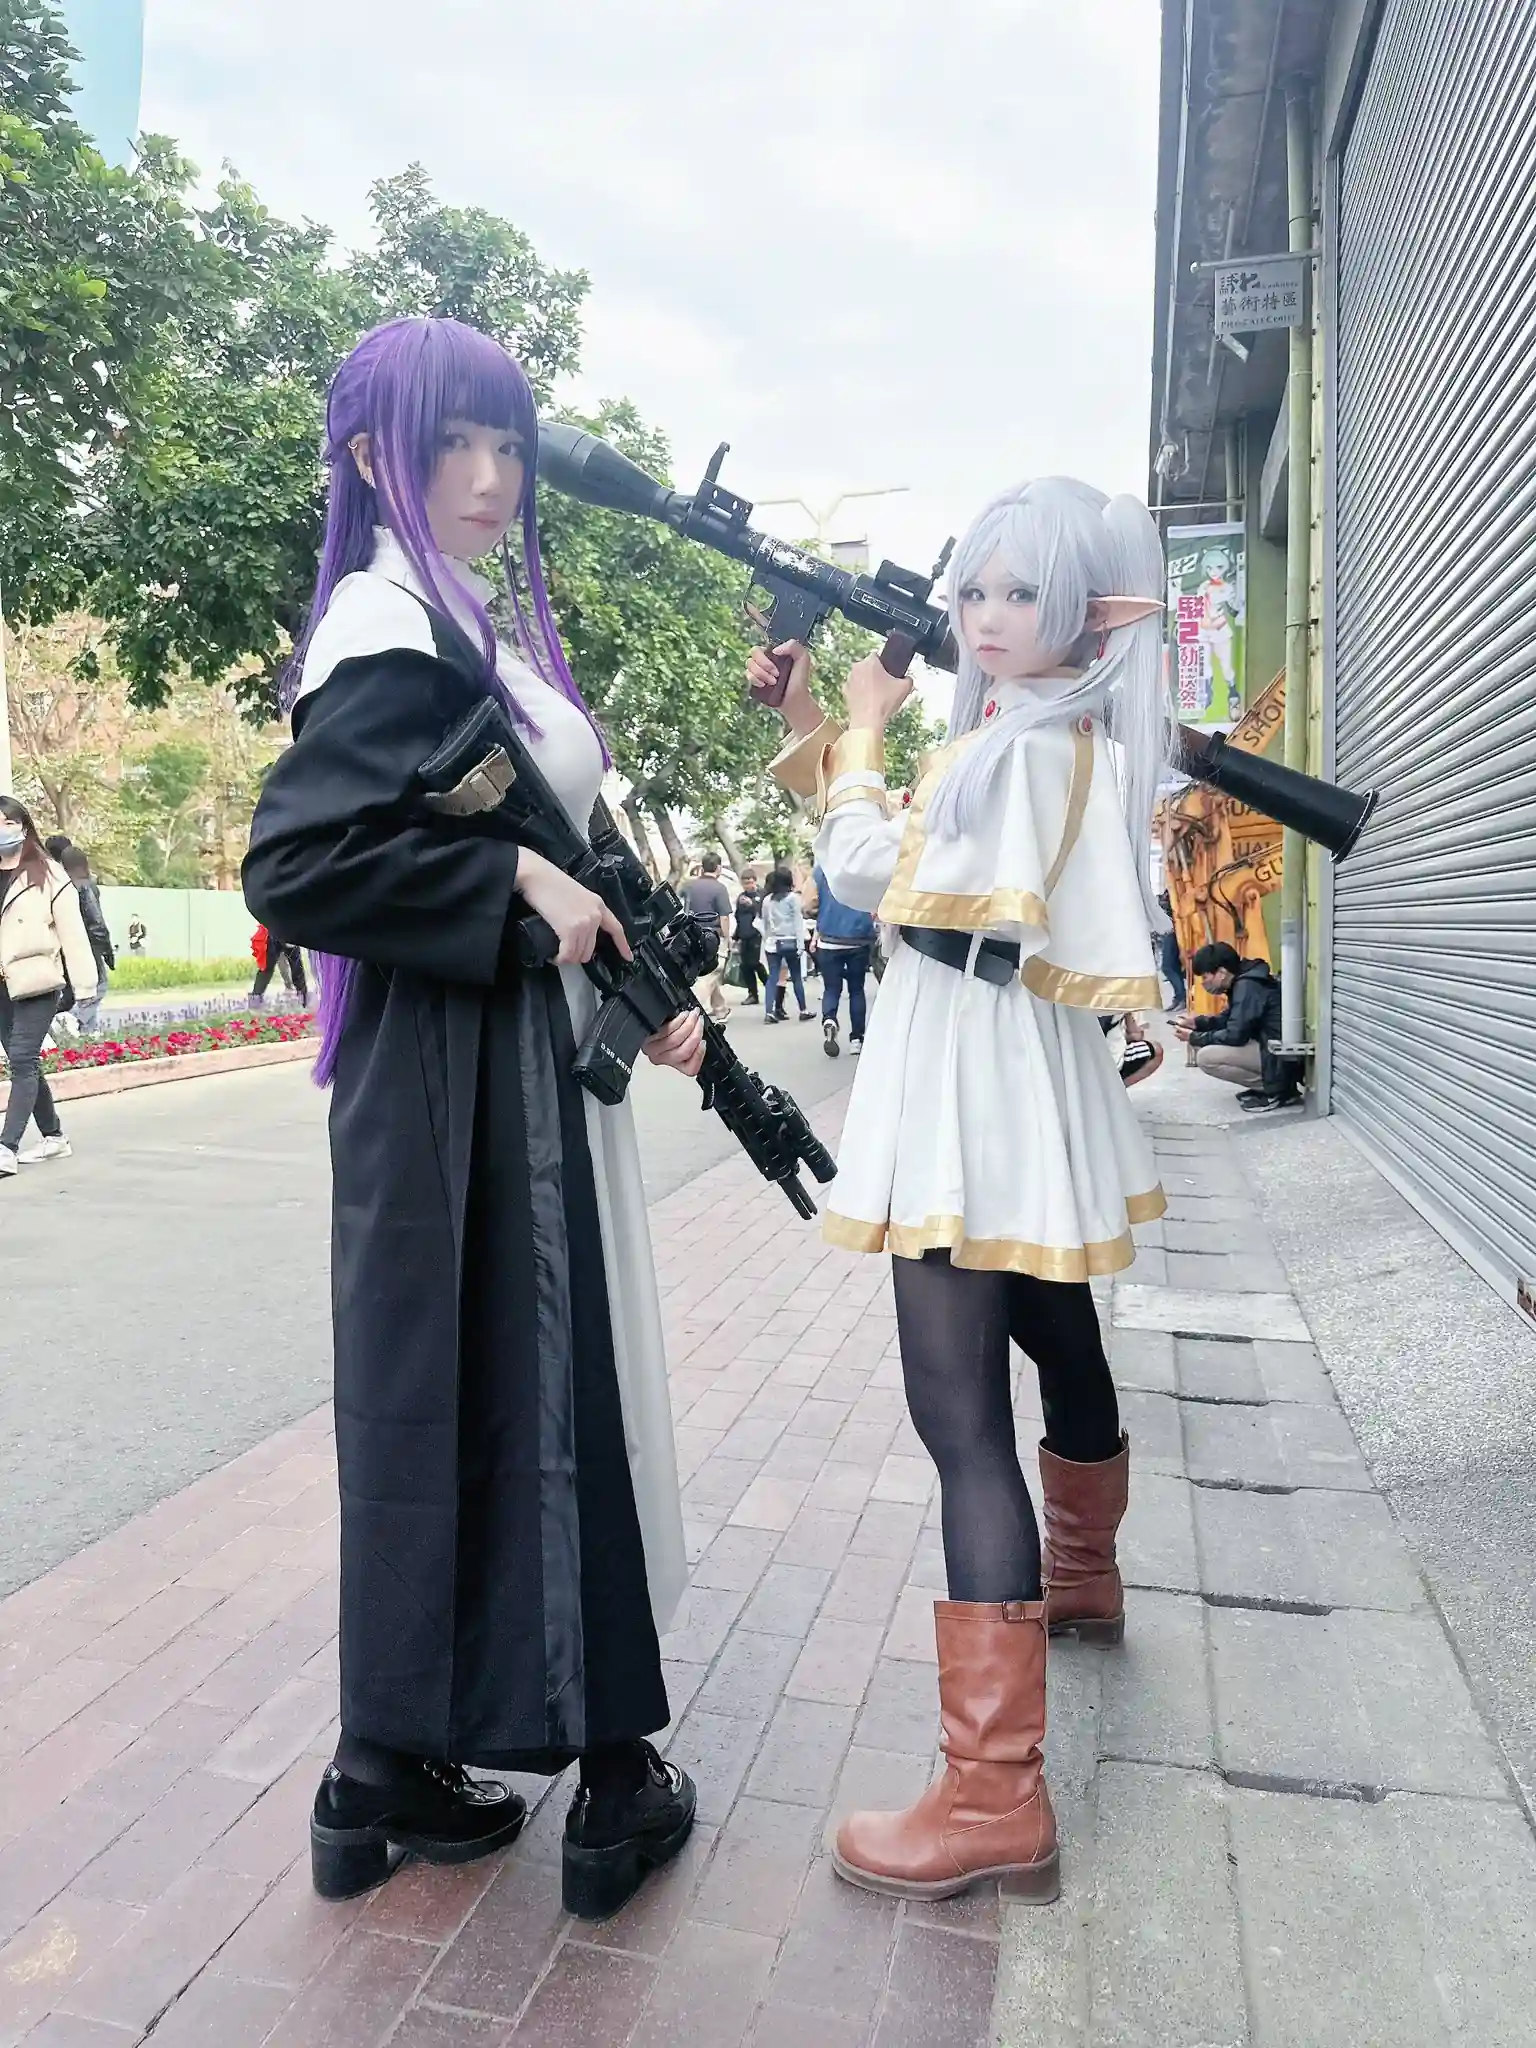 Frieren Cosplay Swaps Magic Wands for Weapons